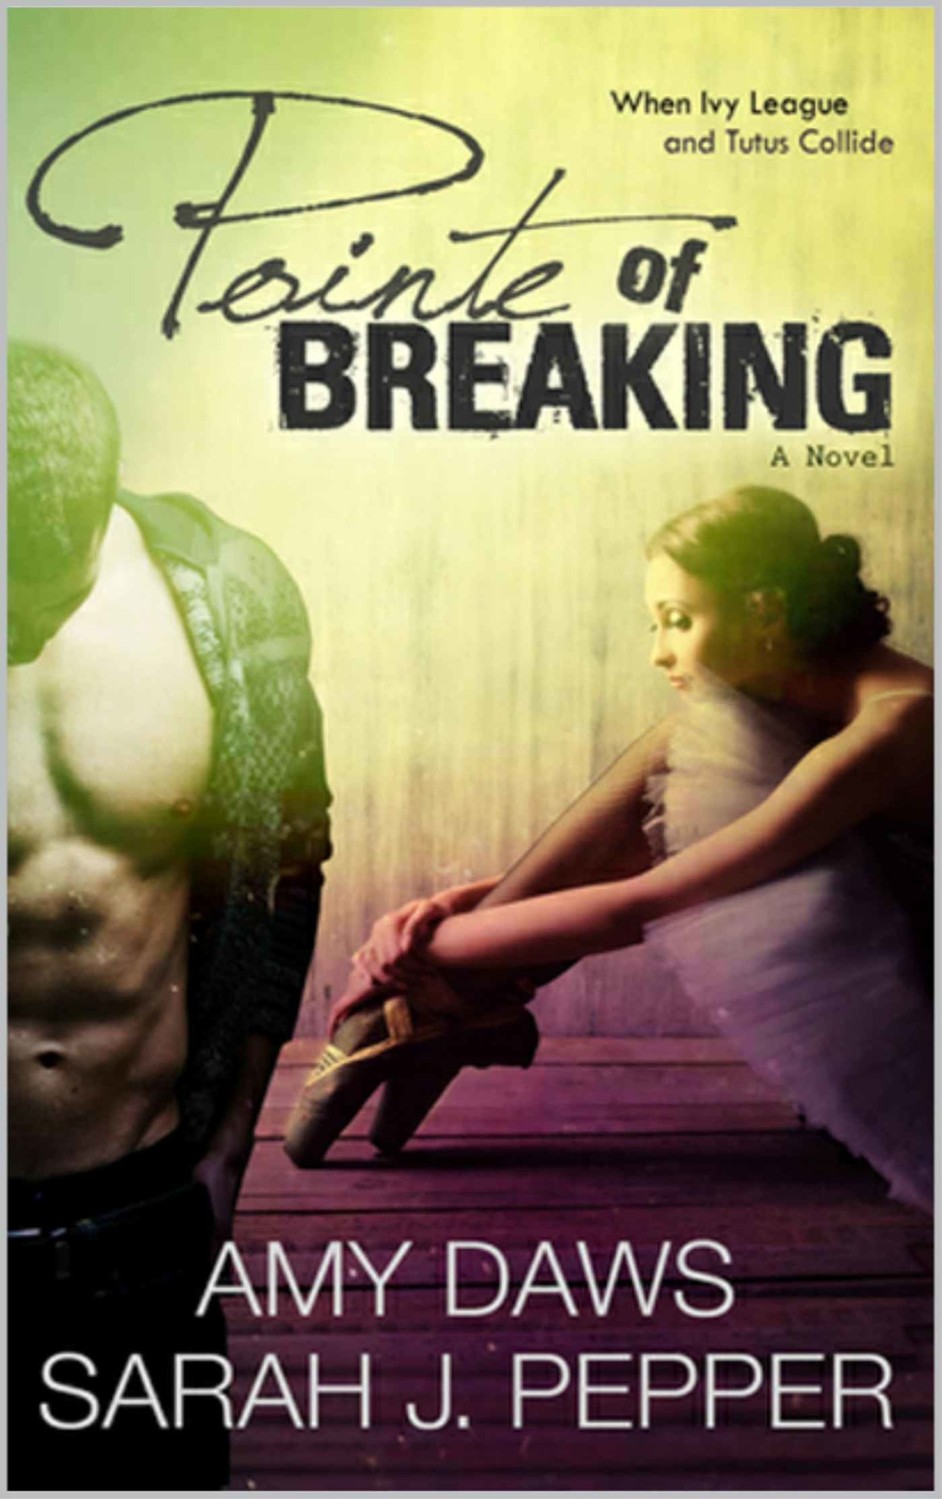 Pointe of Breaking by Amy Daws